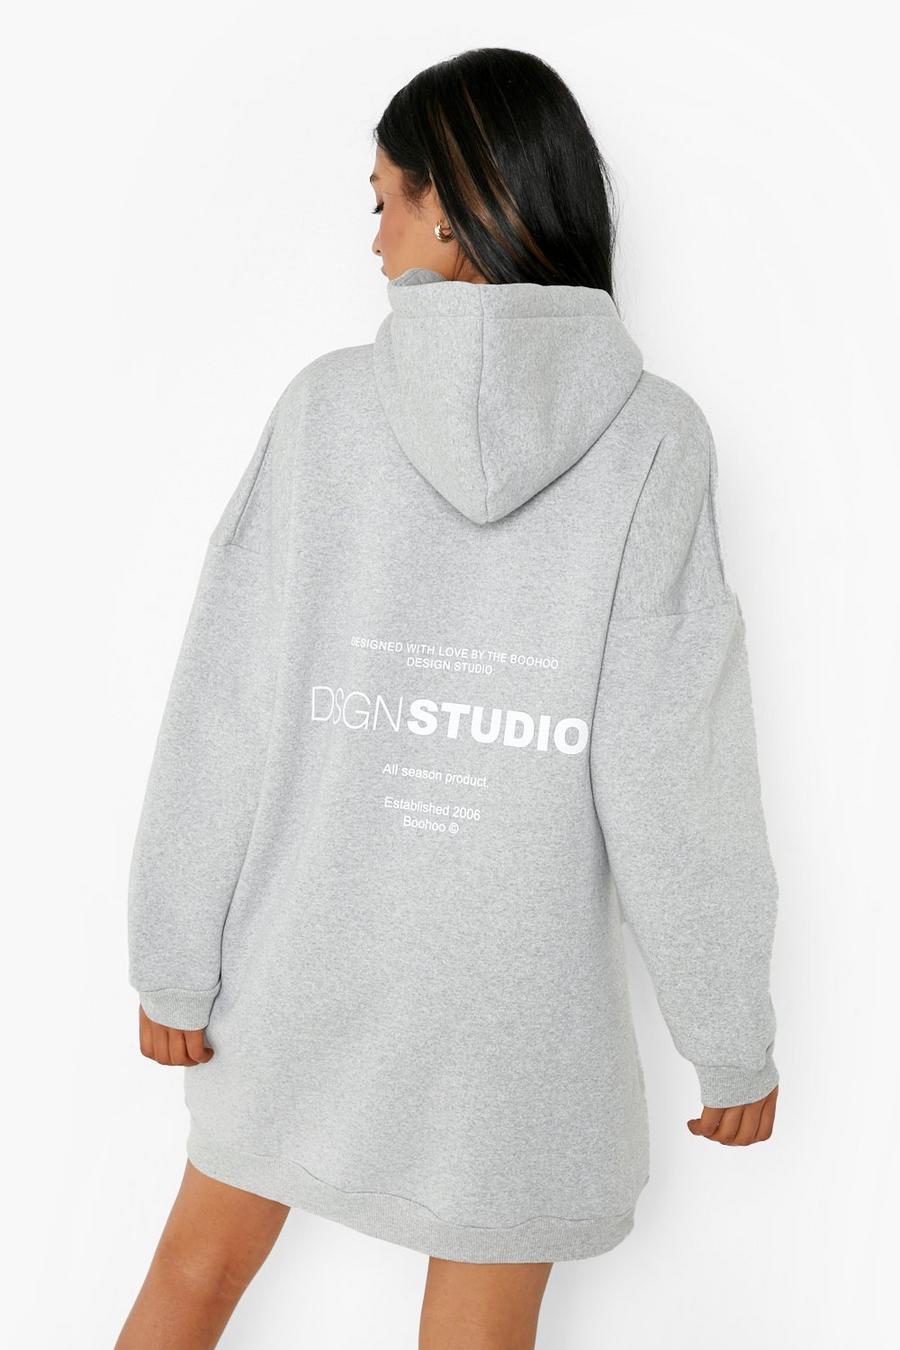 Grey Tall Dsgn Studio Hooded Sweat Dress image number 1